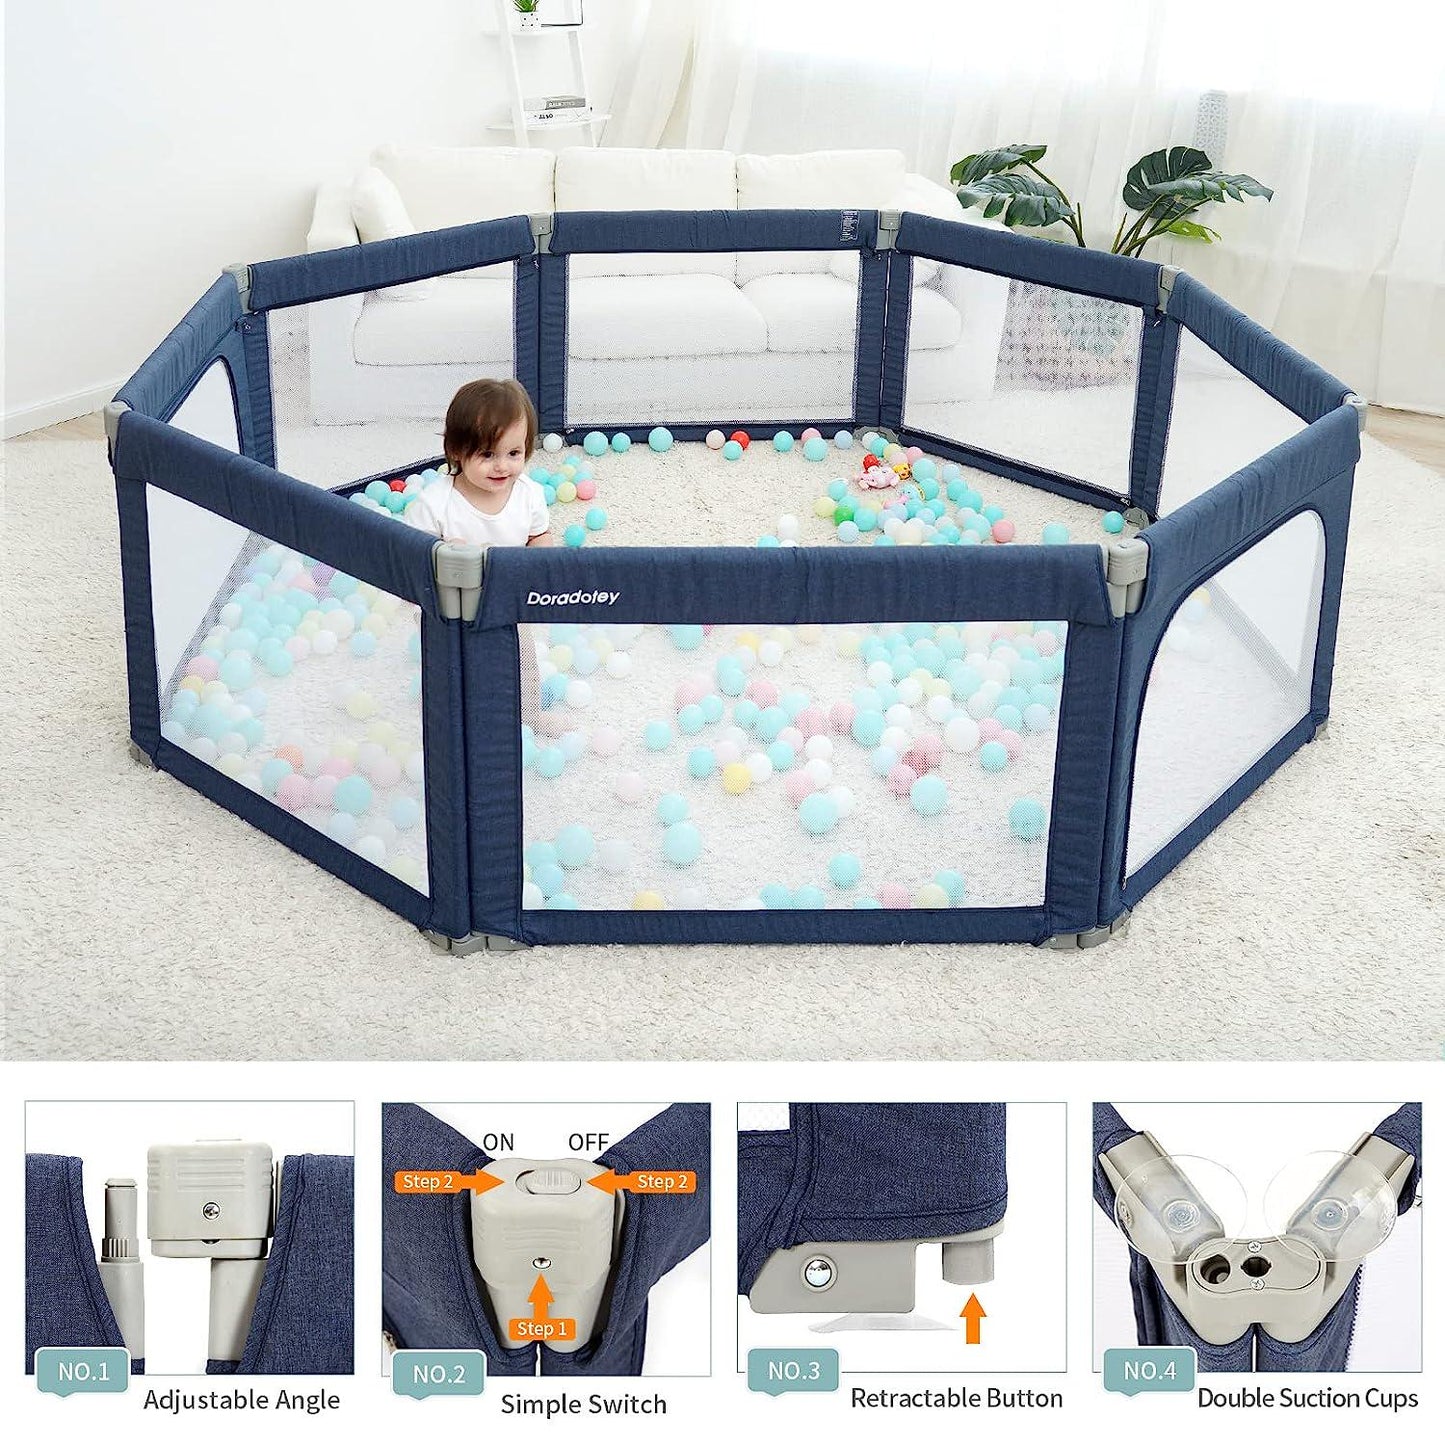 Doradotey Baby Playpen, Shape and Size Adjustable Large Play Center Yards Play Pens for Babies, Foldable Infant Playpen Baby Fence Play Yard Safety Toddler Playpen(Navy Blue)